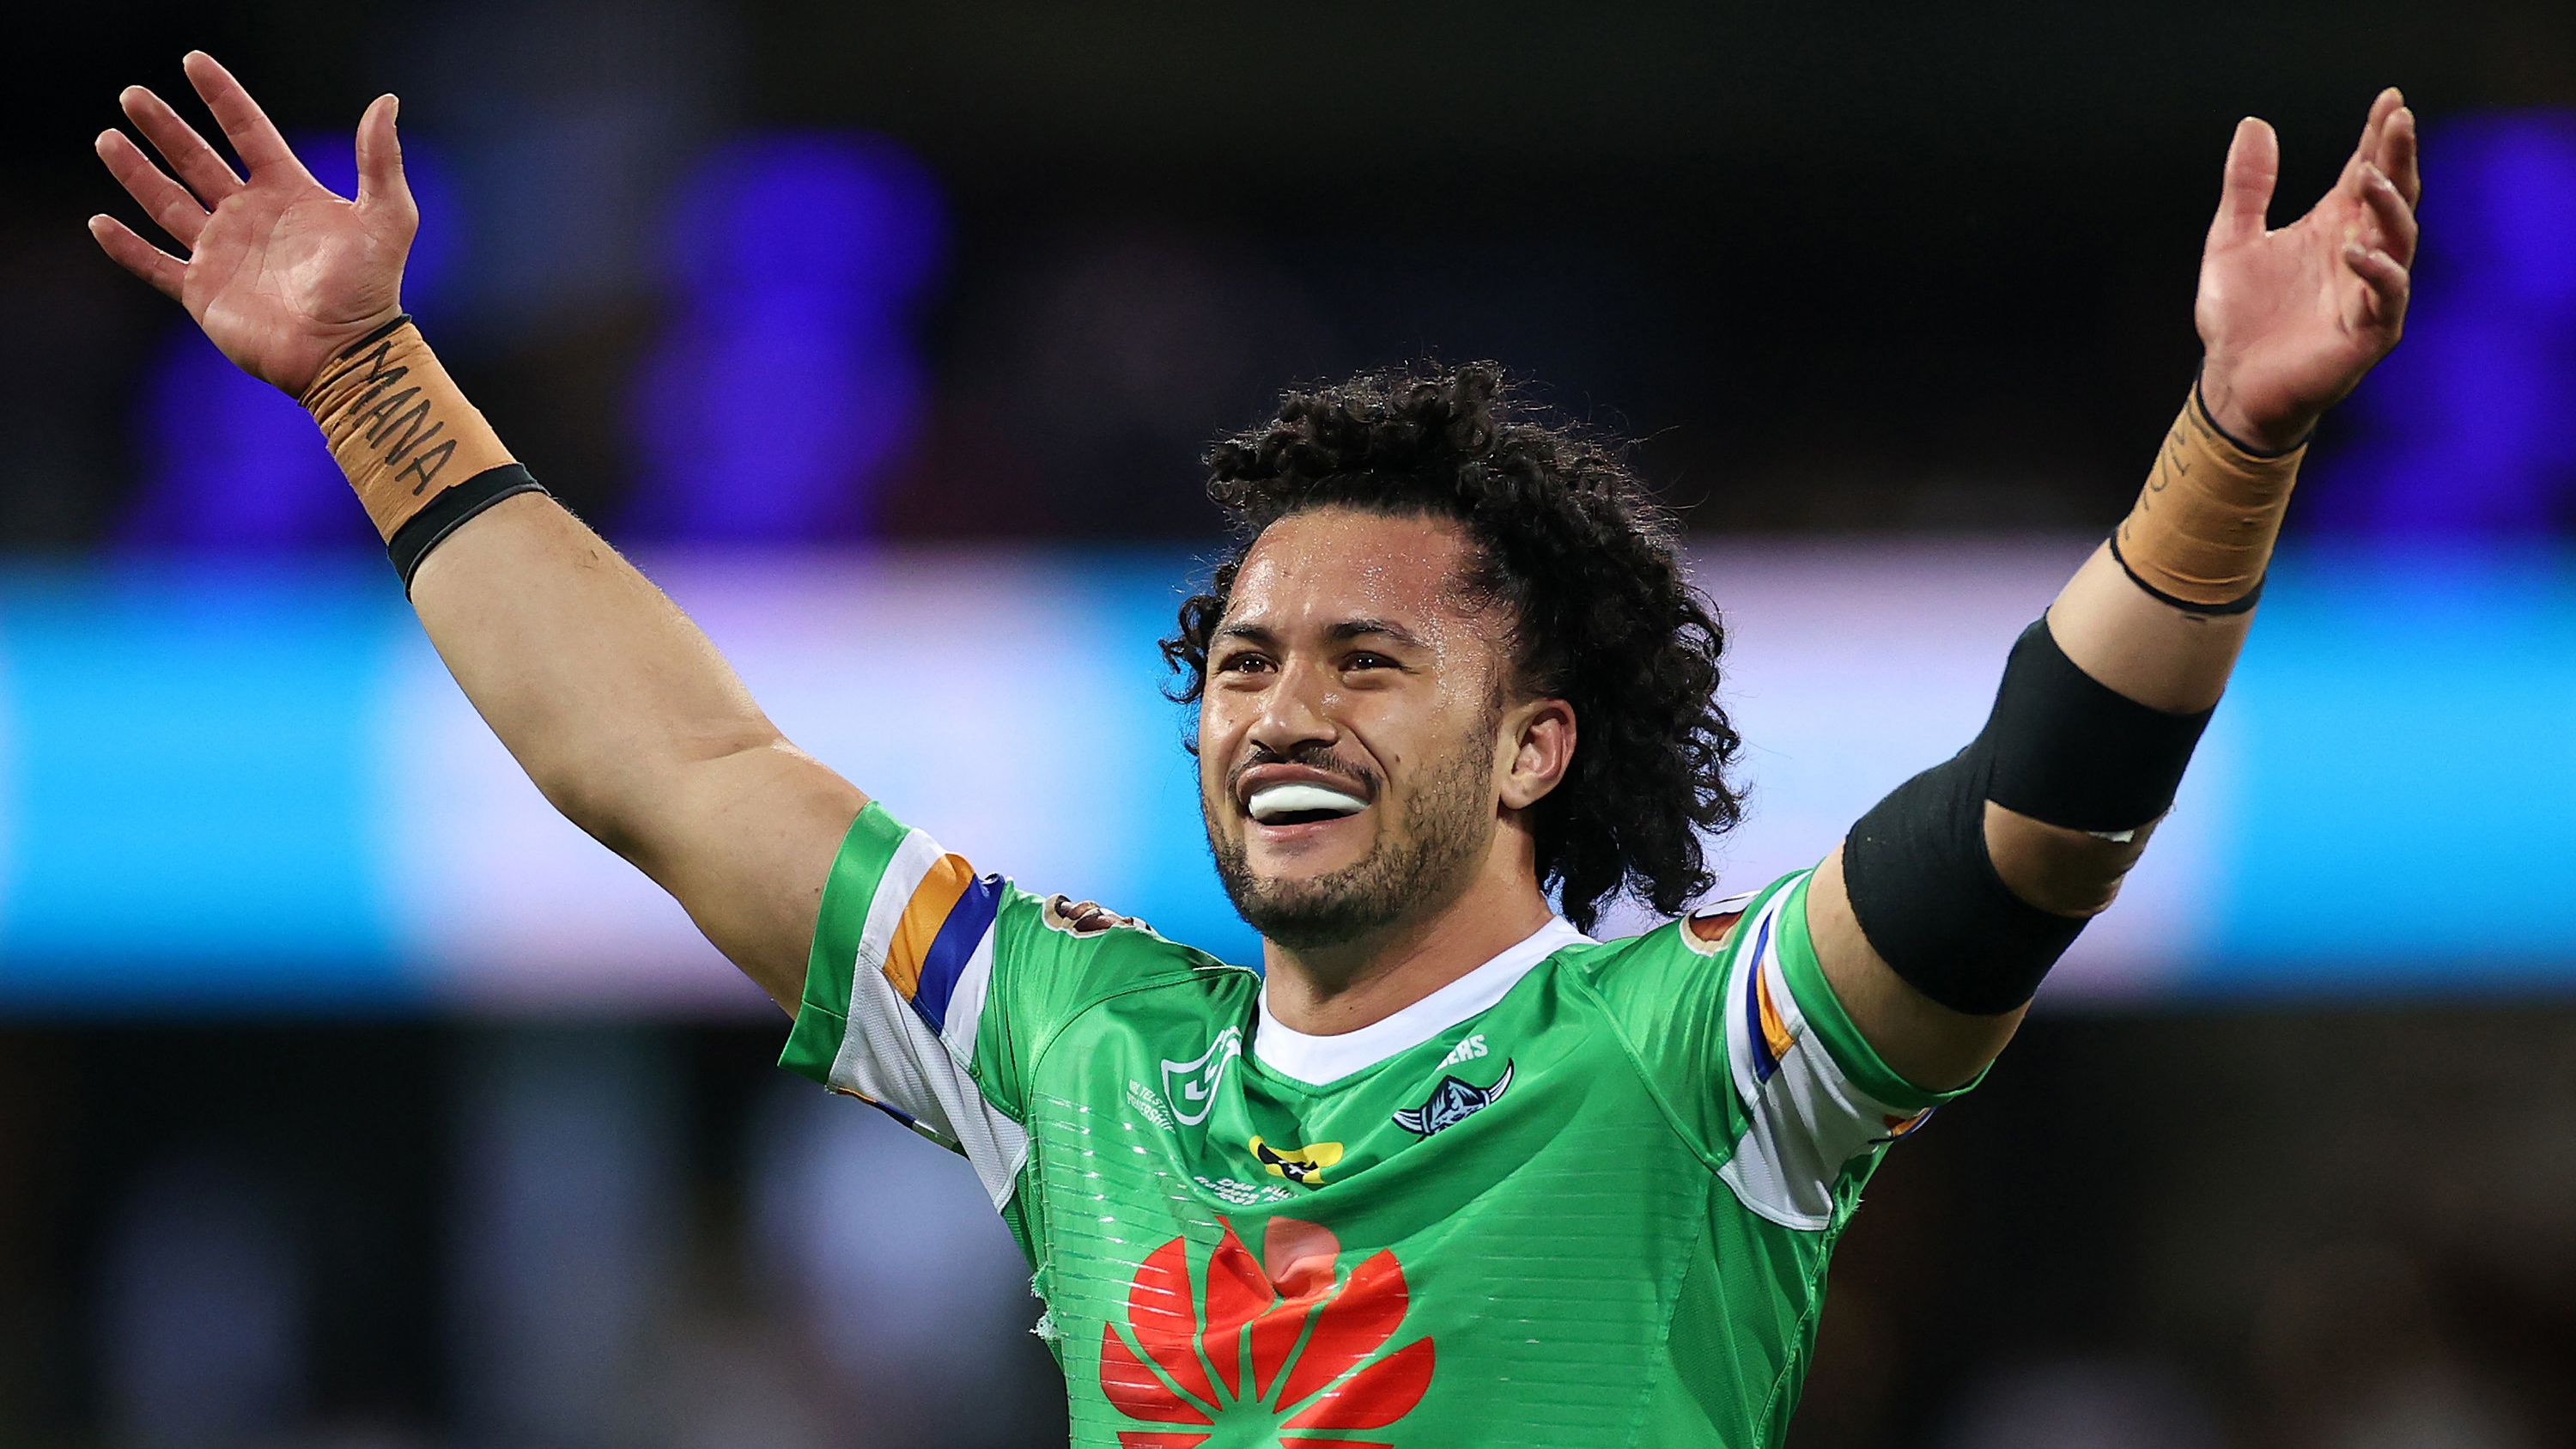 Corey Harawira-Naera during the NRL Semi Final match between the Sydney Roosters and the Canberra Raiders at Sydney Cricket Ground on October 09, 2020 in Sydney, Australia. (Photo by Cameron Spencer/Getty Images)